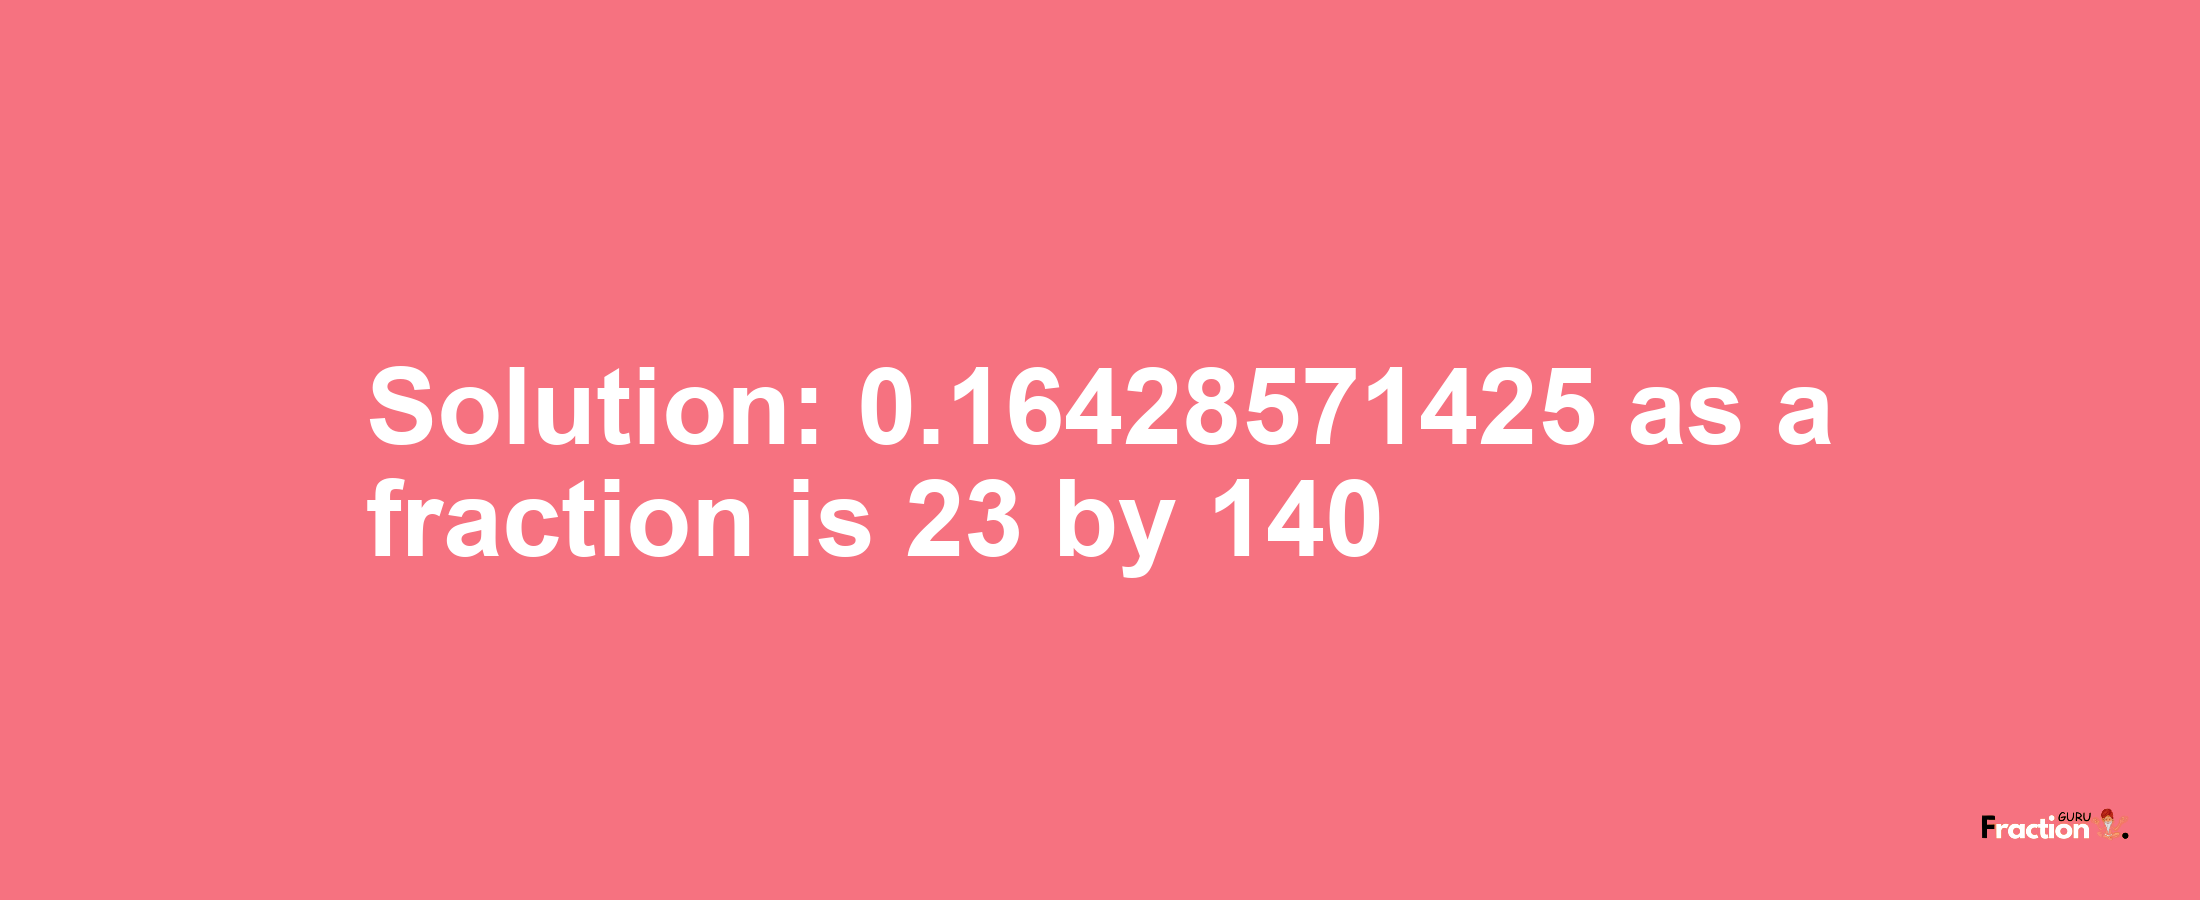 Solution:0.16428571425 as a fraction is 23/140